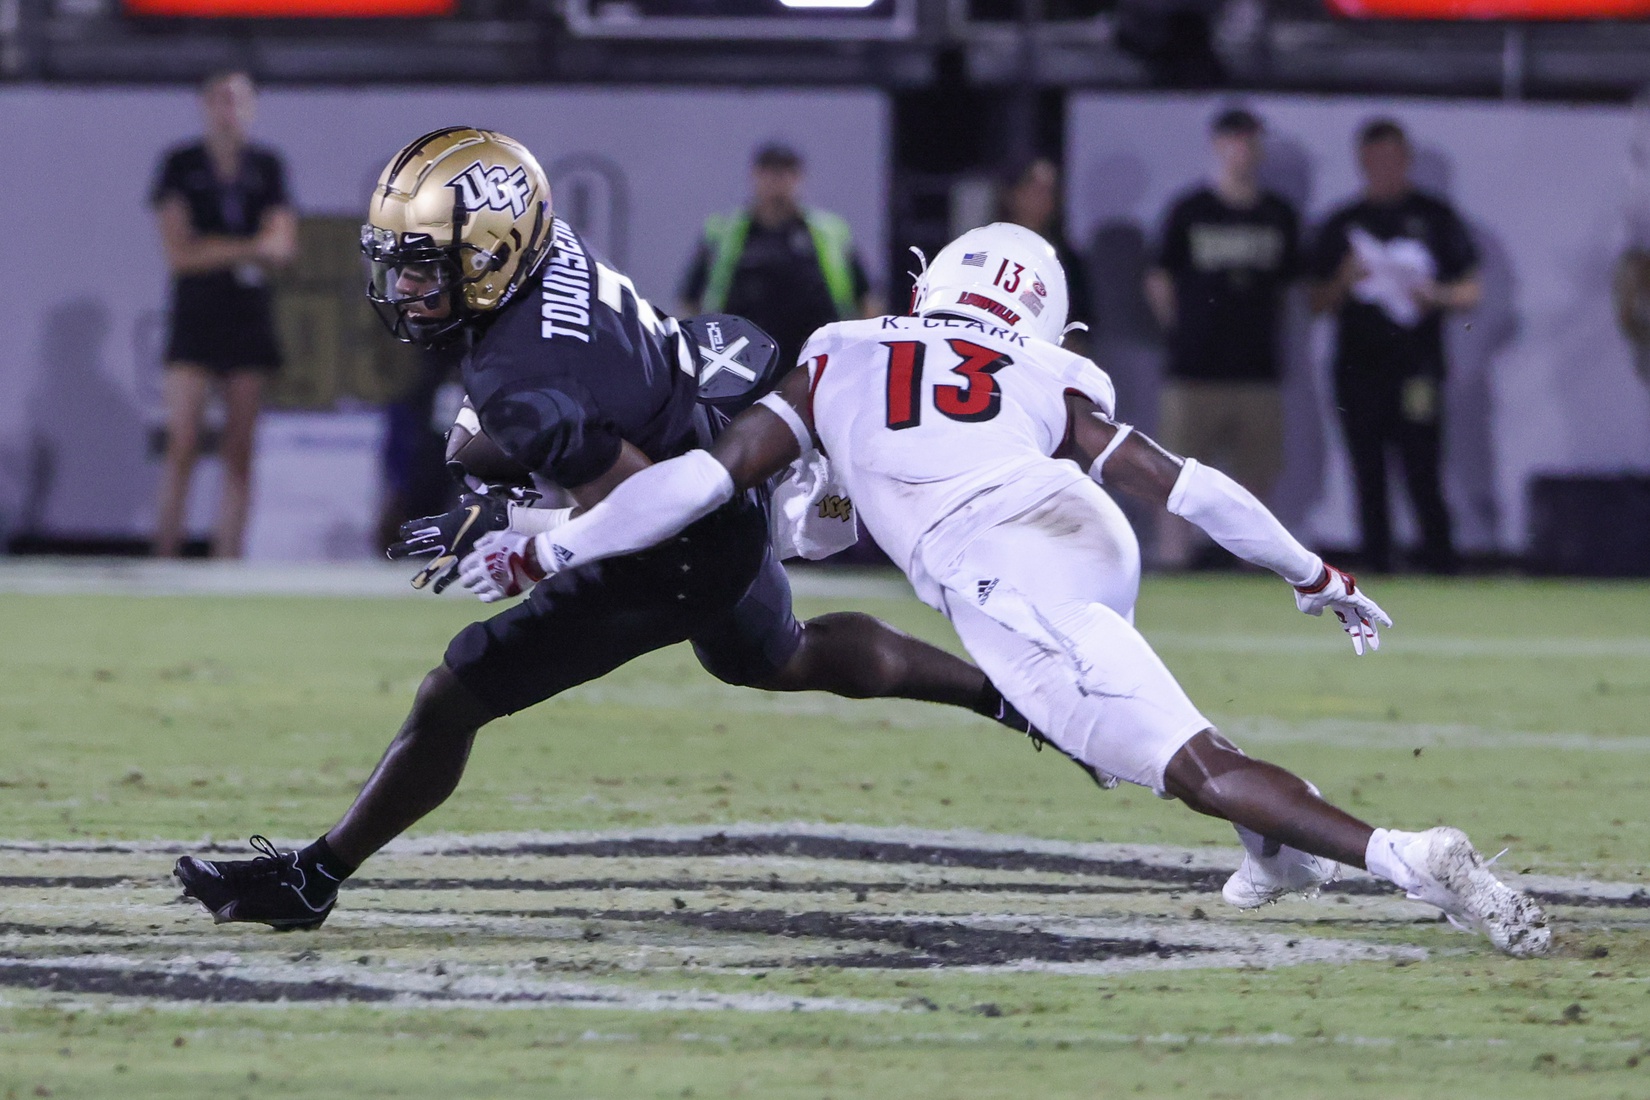 Sep 9, 2022; Orlando, Florida, USA; UCF Knights wide receiver Xavier Townsend (3) carries the ball against Louisville Cardinals defensive back Kei'Trel Clark (13) during the second quarter at FBC Mortgage Stadium. Mandatory Credit: Mike Watters-USA TODAY Sports